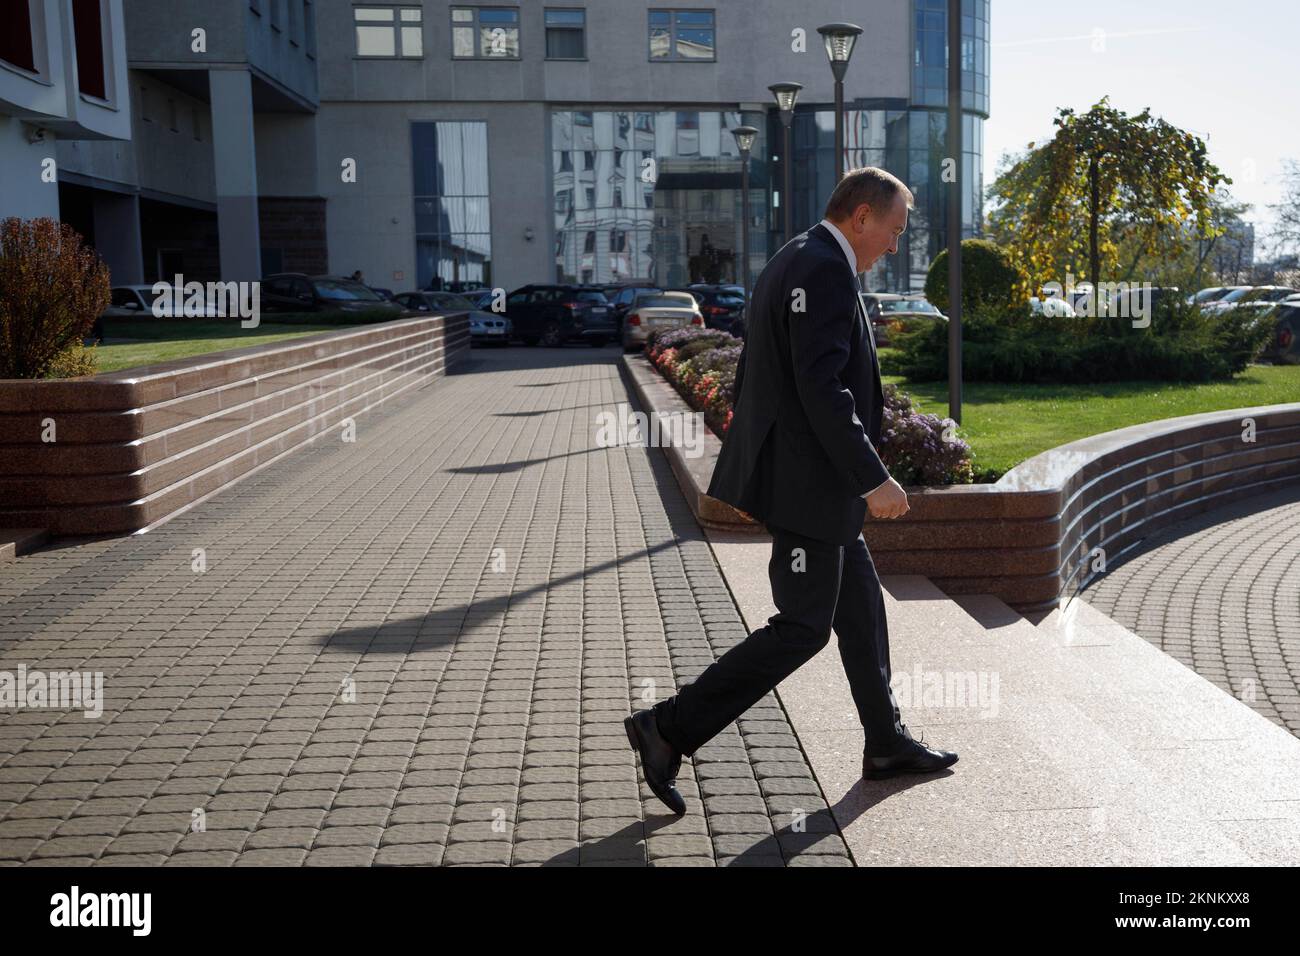 Vladimir Makei (or Uladzimir Makiej), the Minister of Foreign Affairs of the Republic of Belarus leaves the building of MFA after an interview with Belarusian independent journalists. Vladimir Vladimirovich Makei (or Uladzimir Makiej) died in Minsk on November 26, 2022. He was 64 years old. There is no information that he had a chronic illness. Belarusian authorities did not state his cause of death. Makei served as the Minister of Foreign Affairs of Belarus from 2012 till his death in 2022. Since 2015 he has been perceived as a pretty democratic leader. After the mass protests in Belarus that Stock Photo